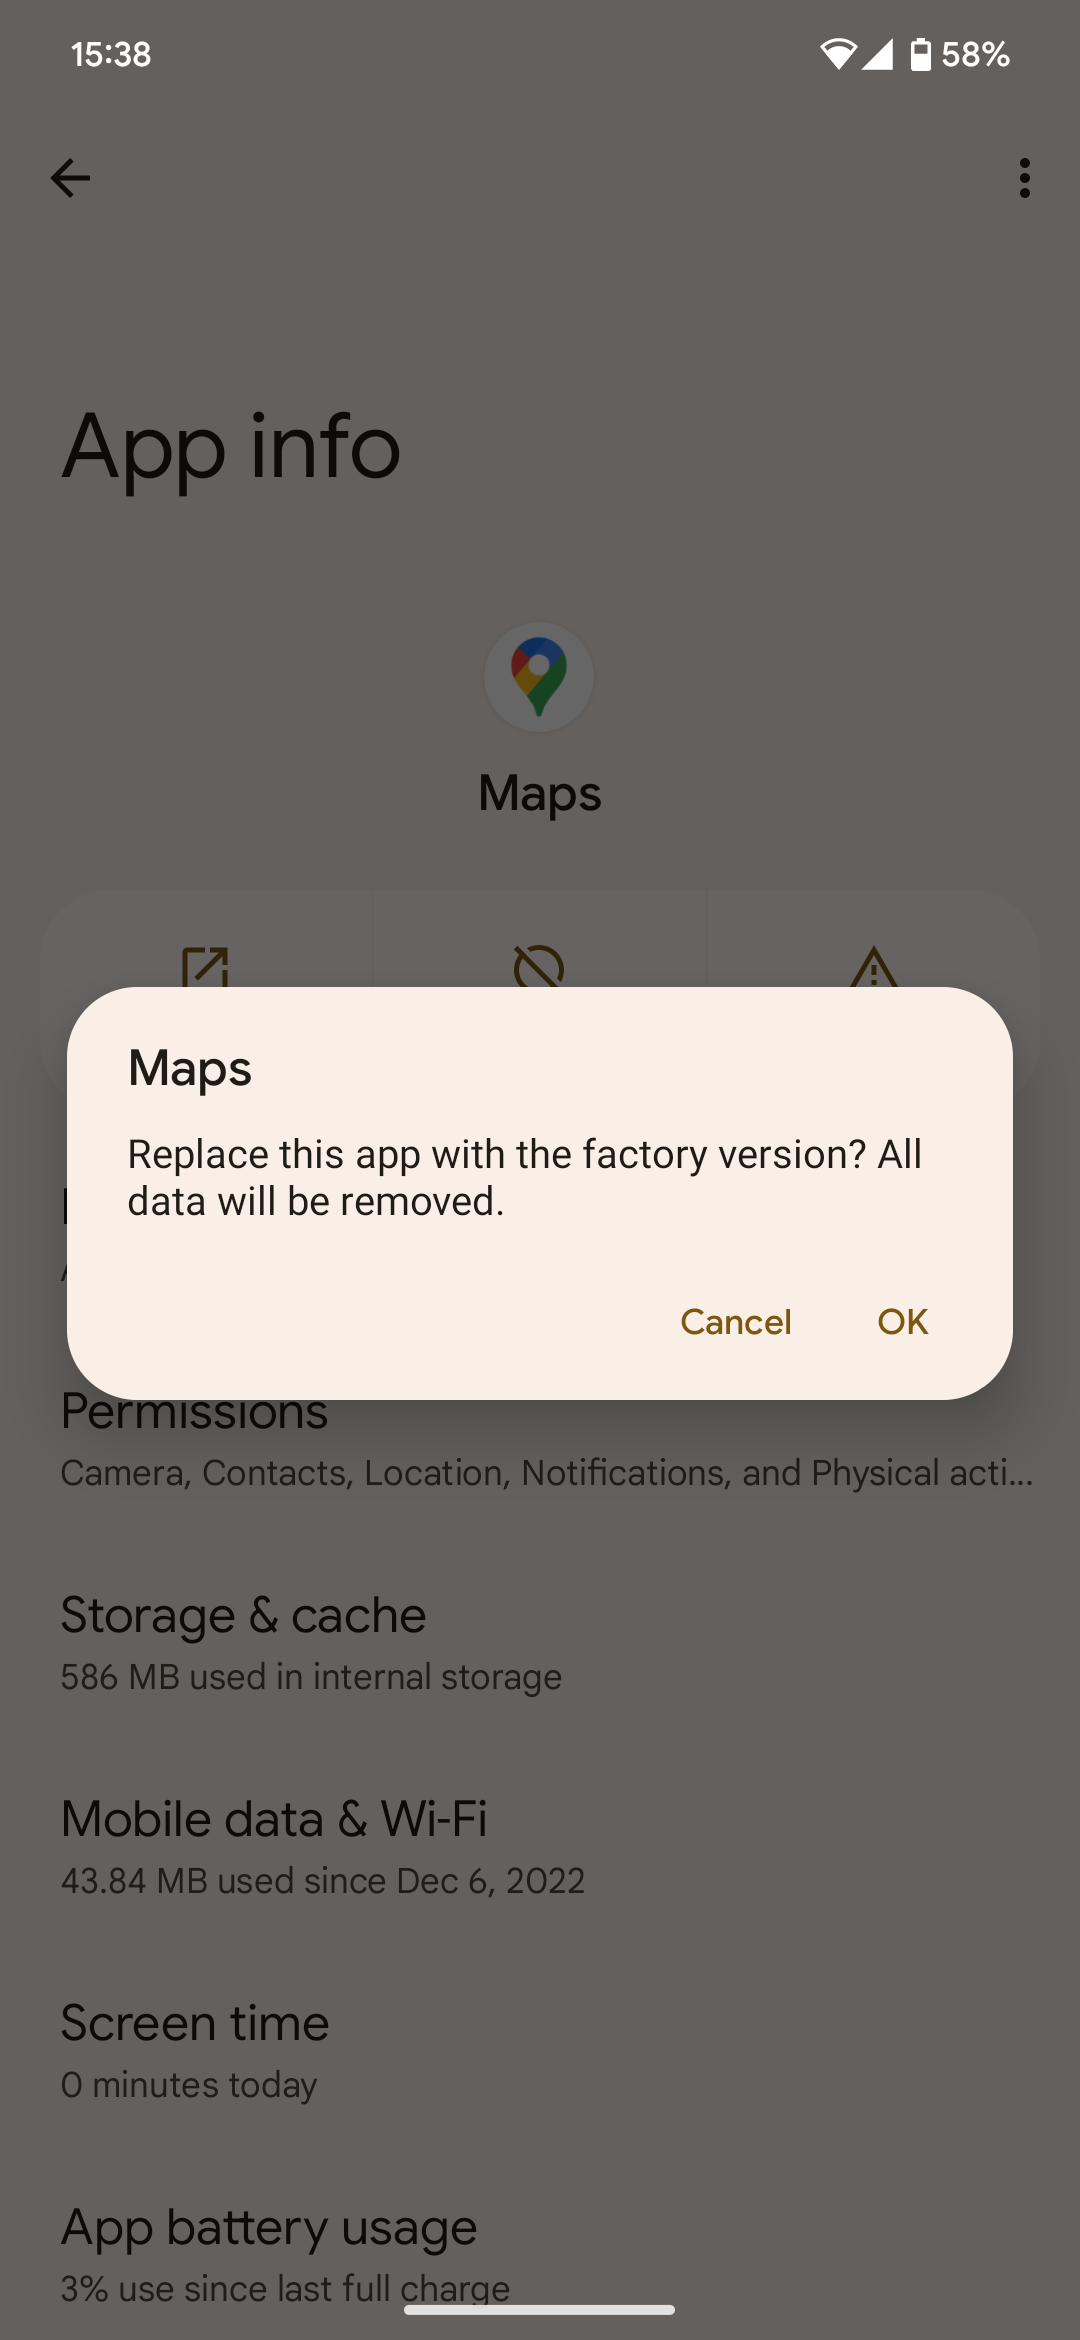 Screenshot of prompt to replace current app version with factory version on an Android system app